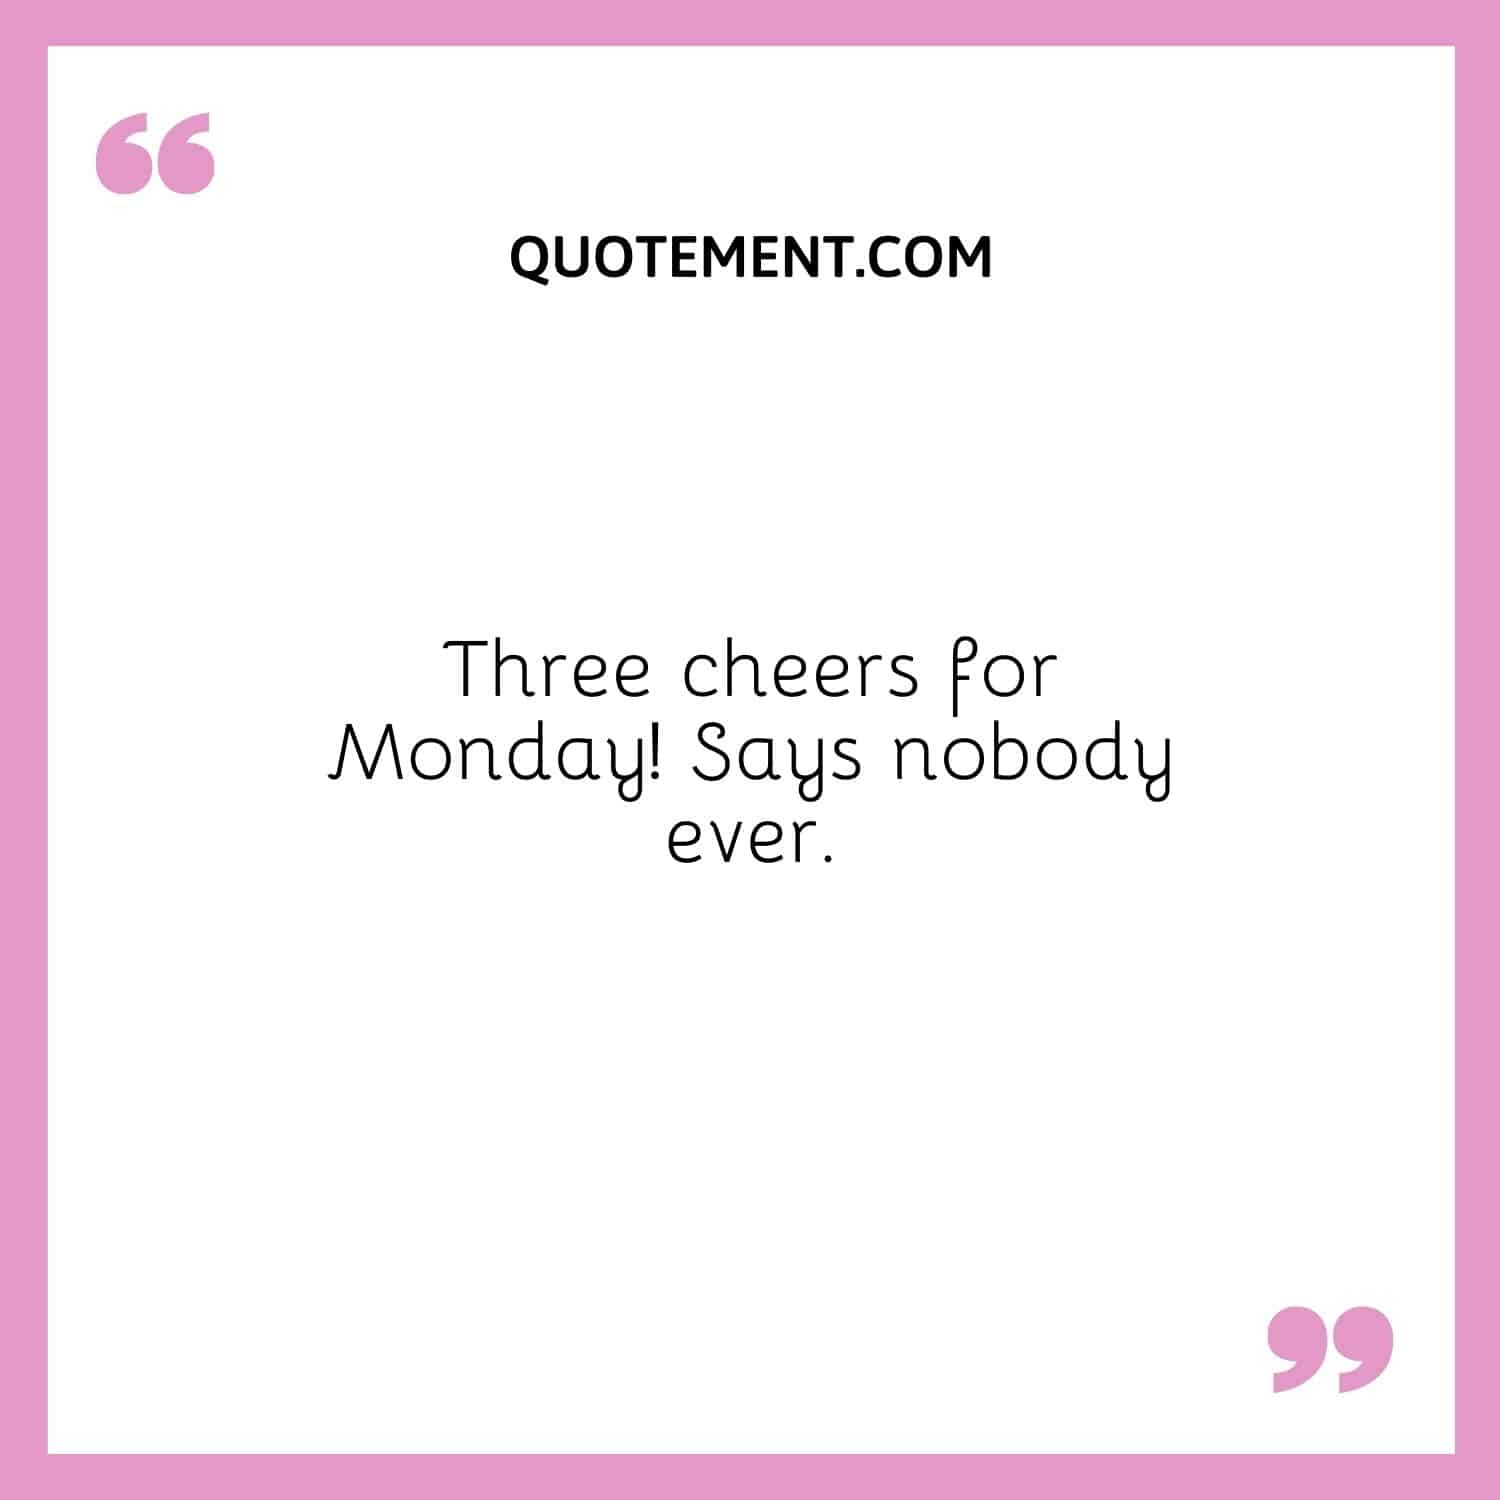 Three cheers for Monday!